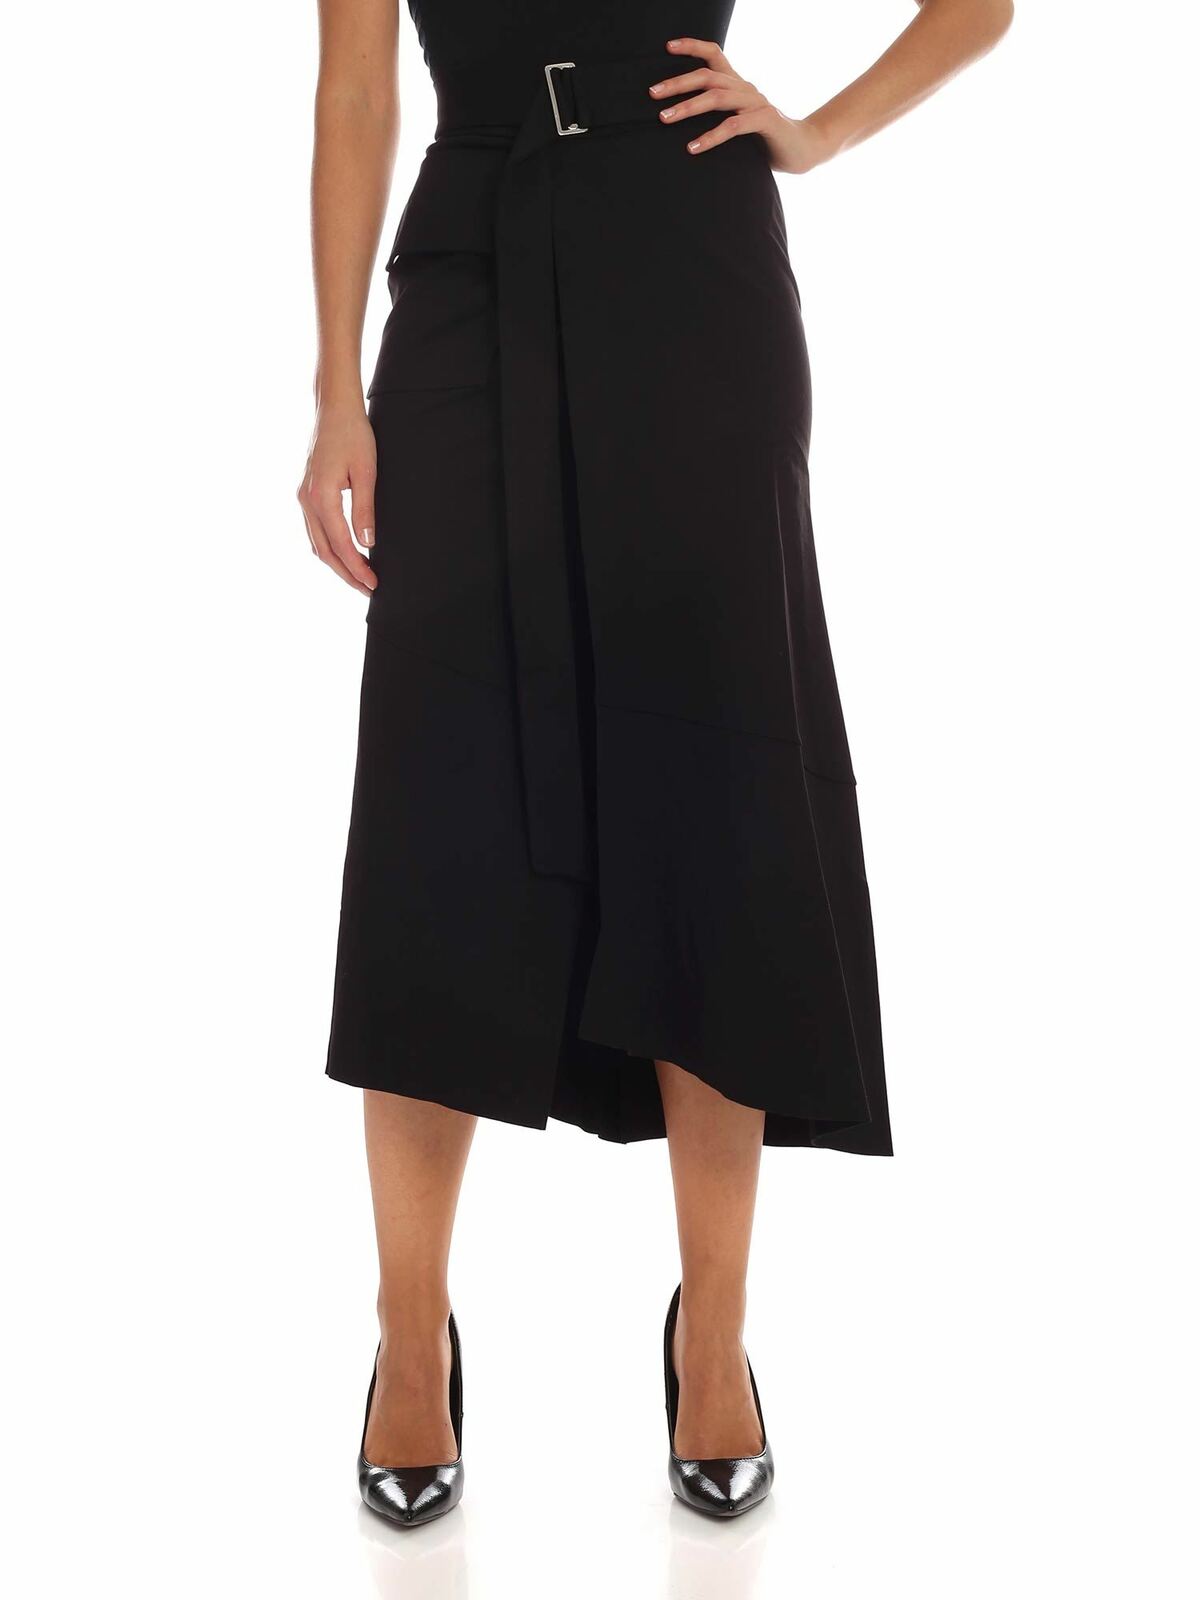 Fuzzi Black Skirt With Front Vent